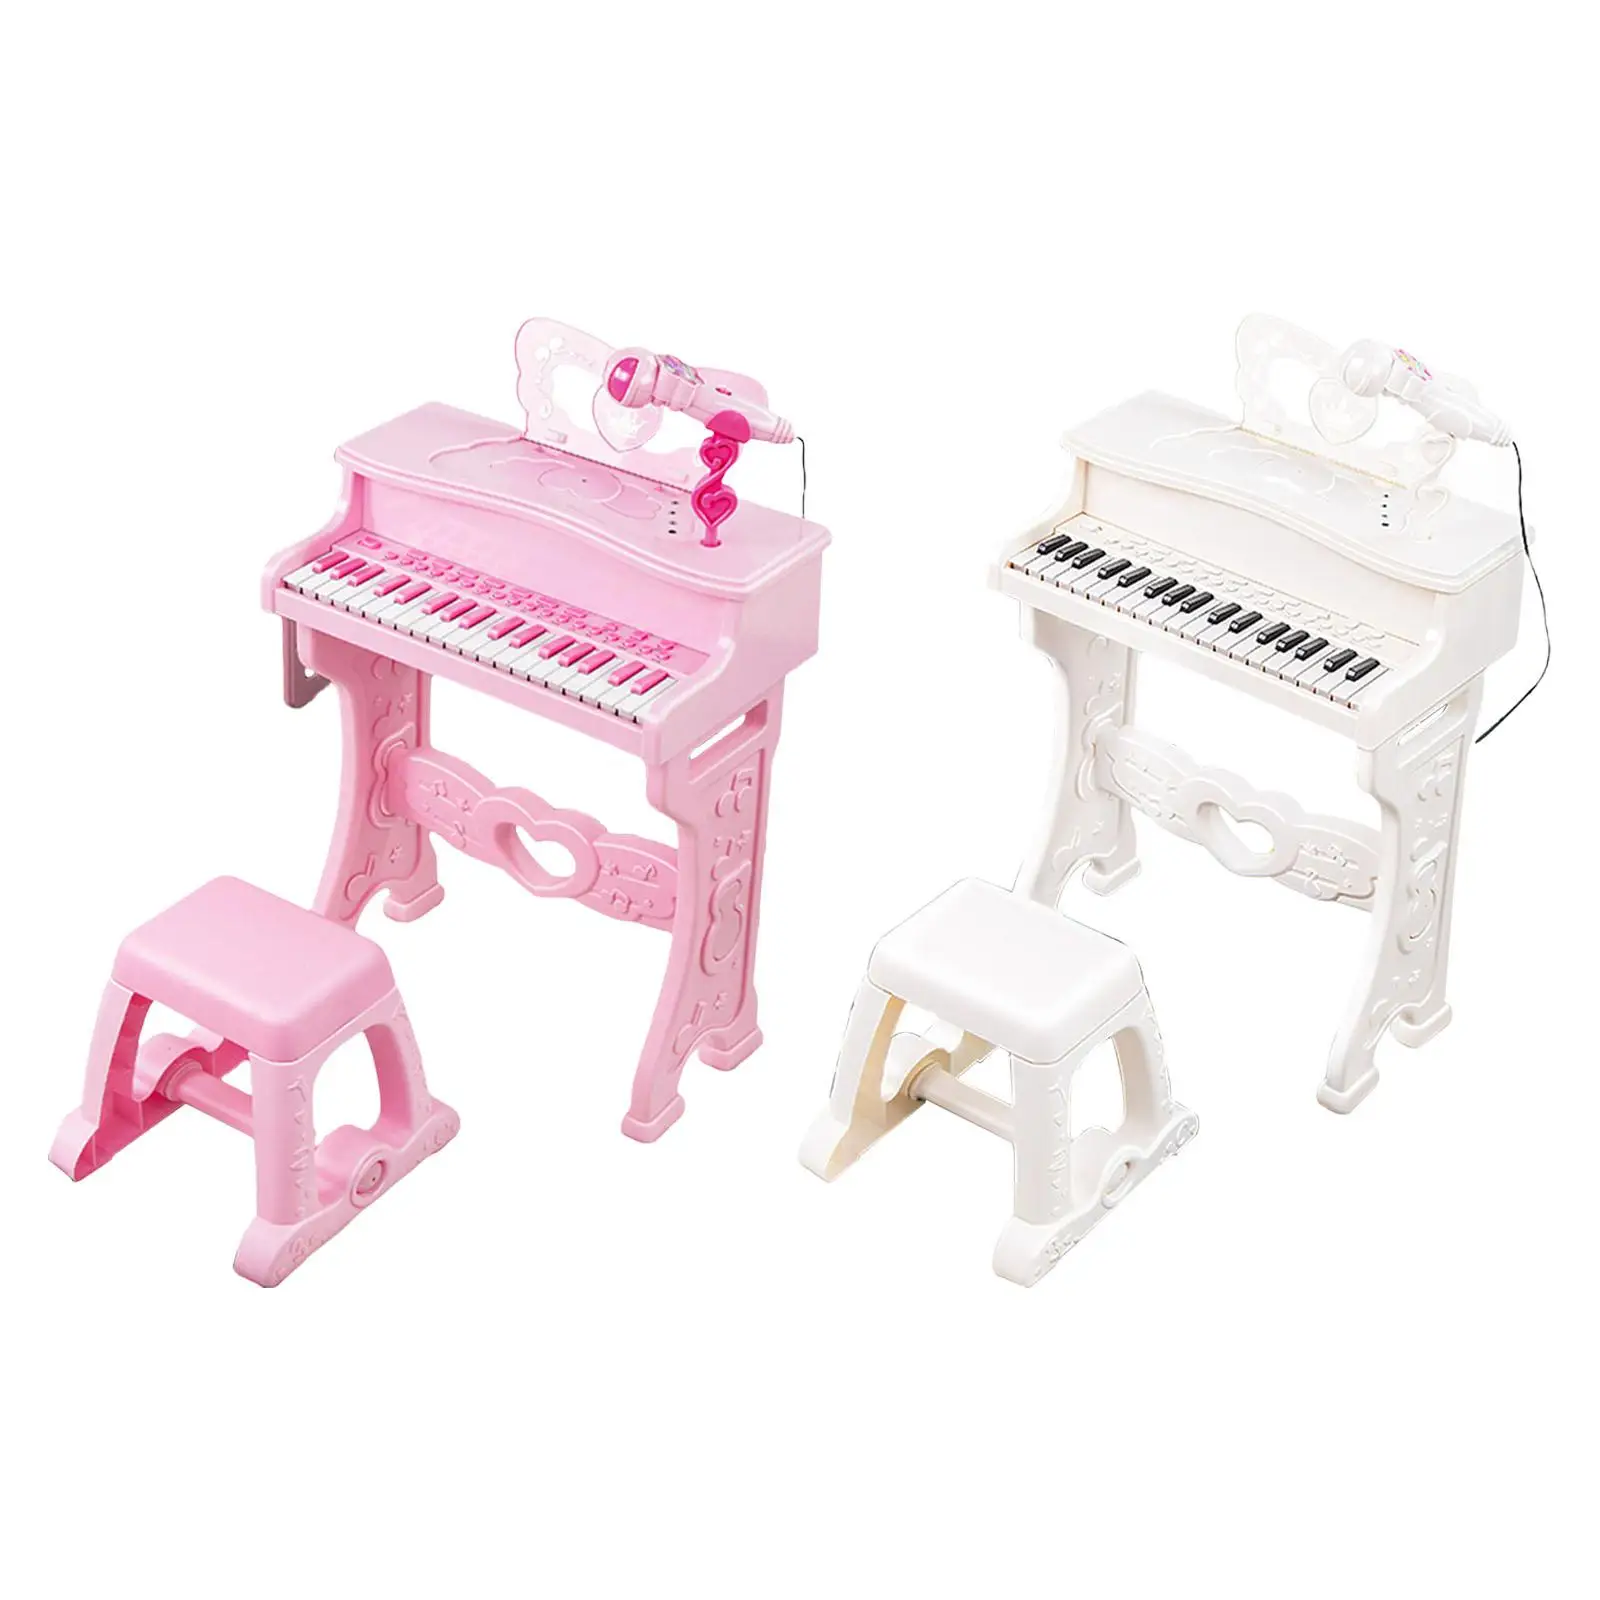 Keyboard with Microphone Educational Toy 37 Key Electronic Piano for Children